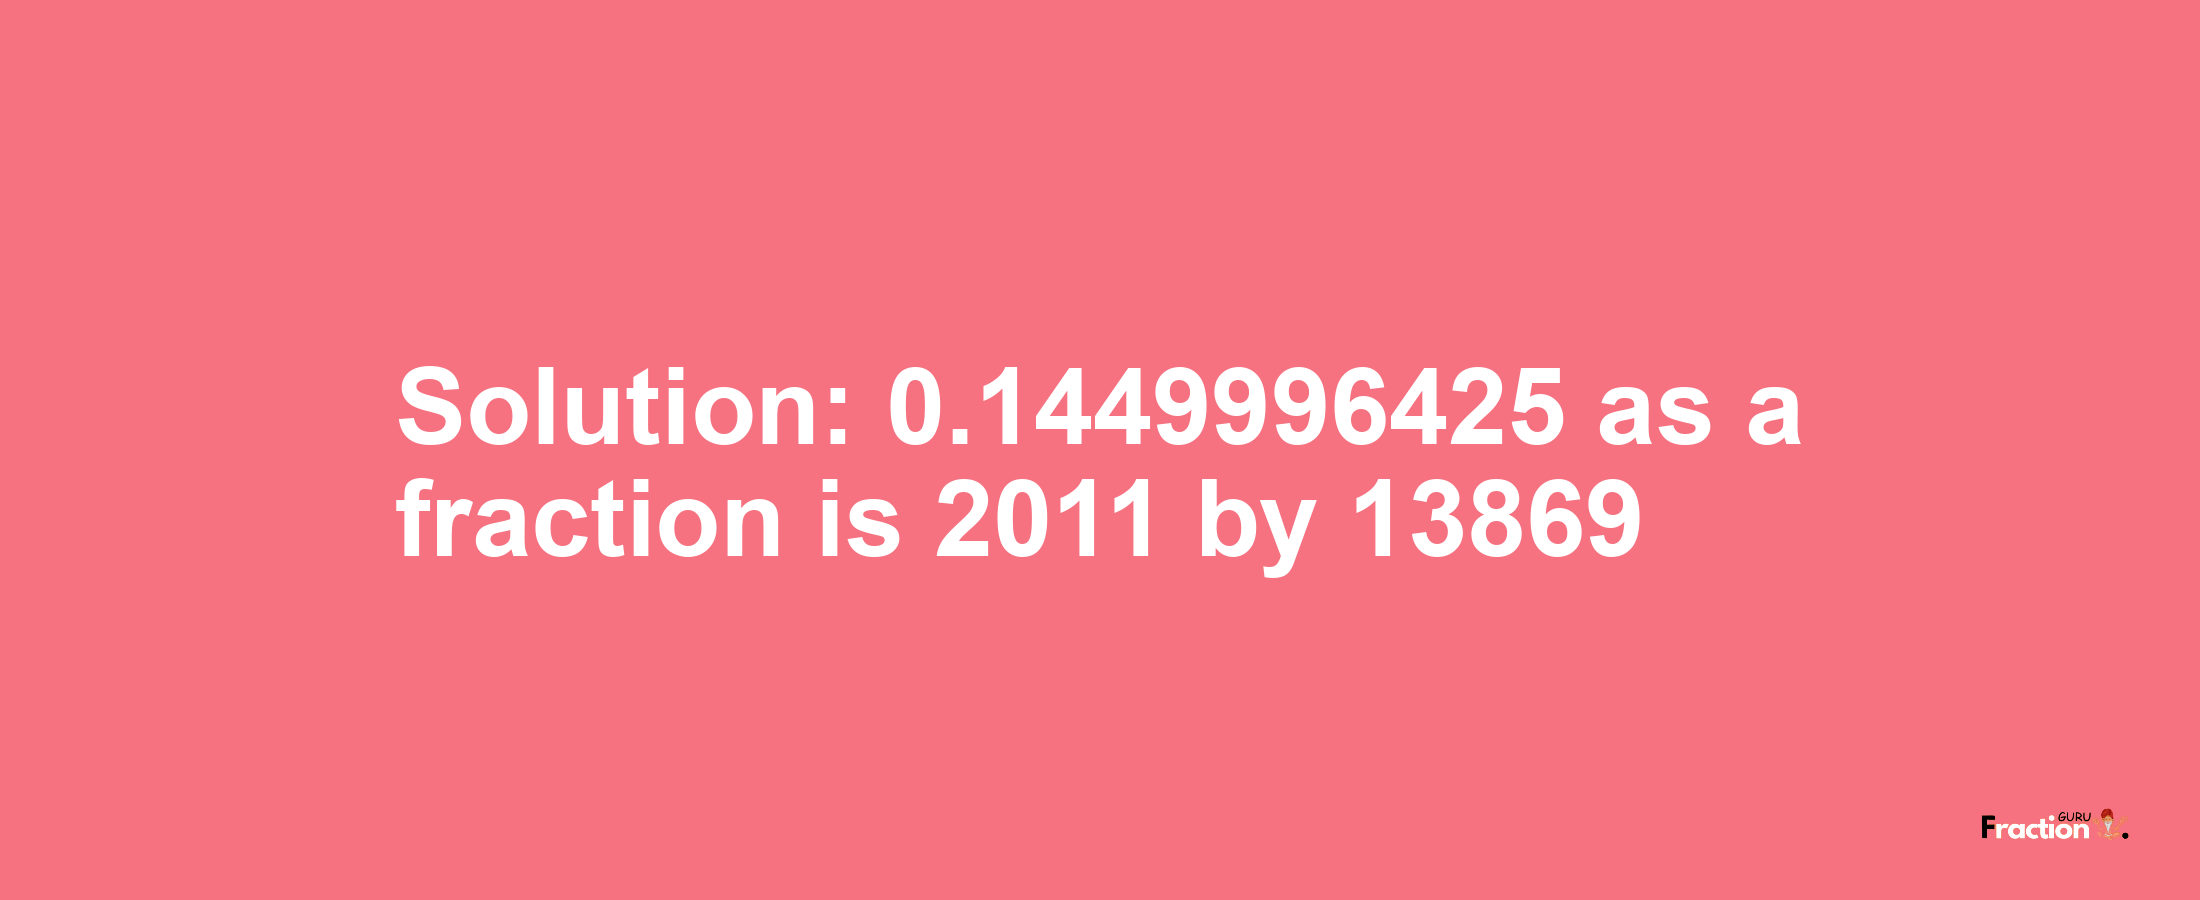 Solution:0.1449996425 as a fraction is 2011/13869